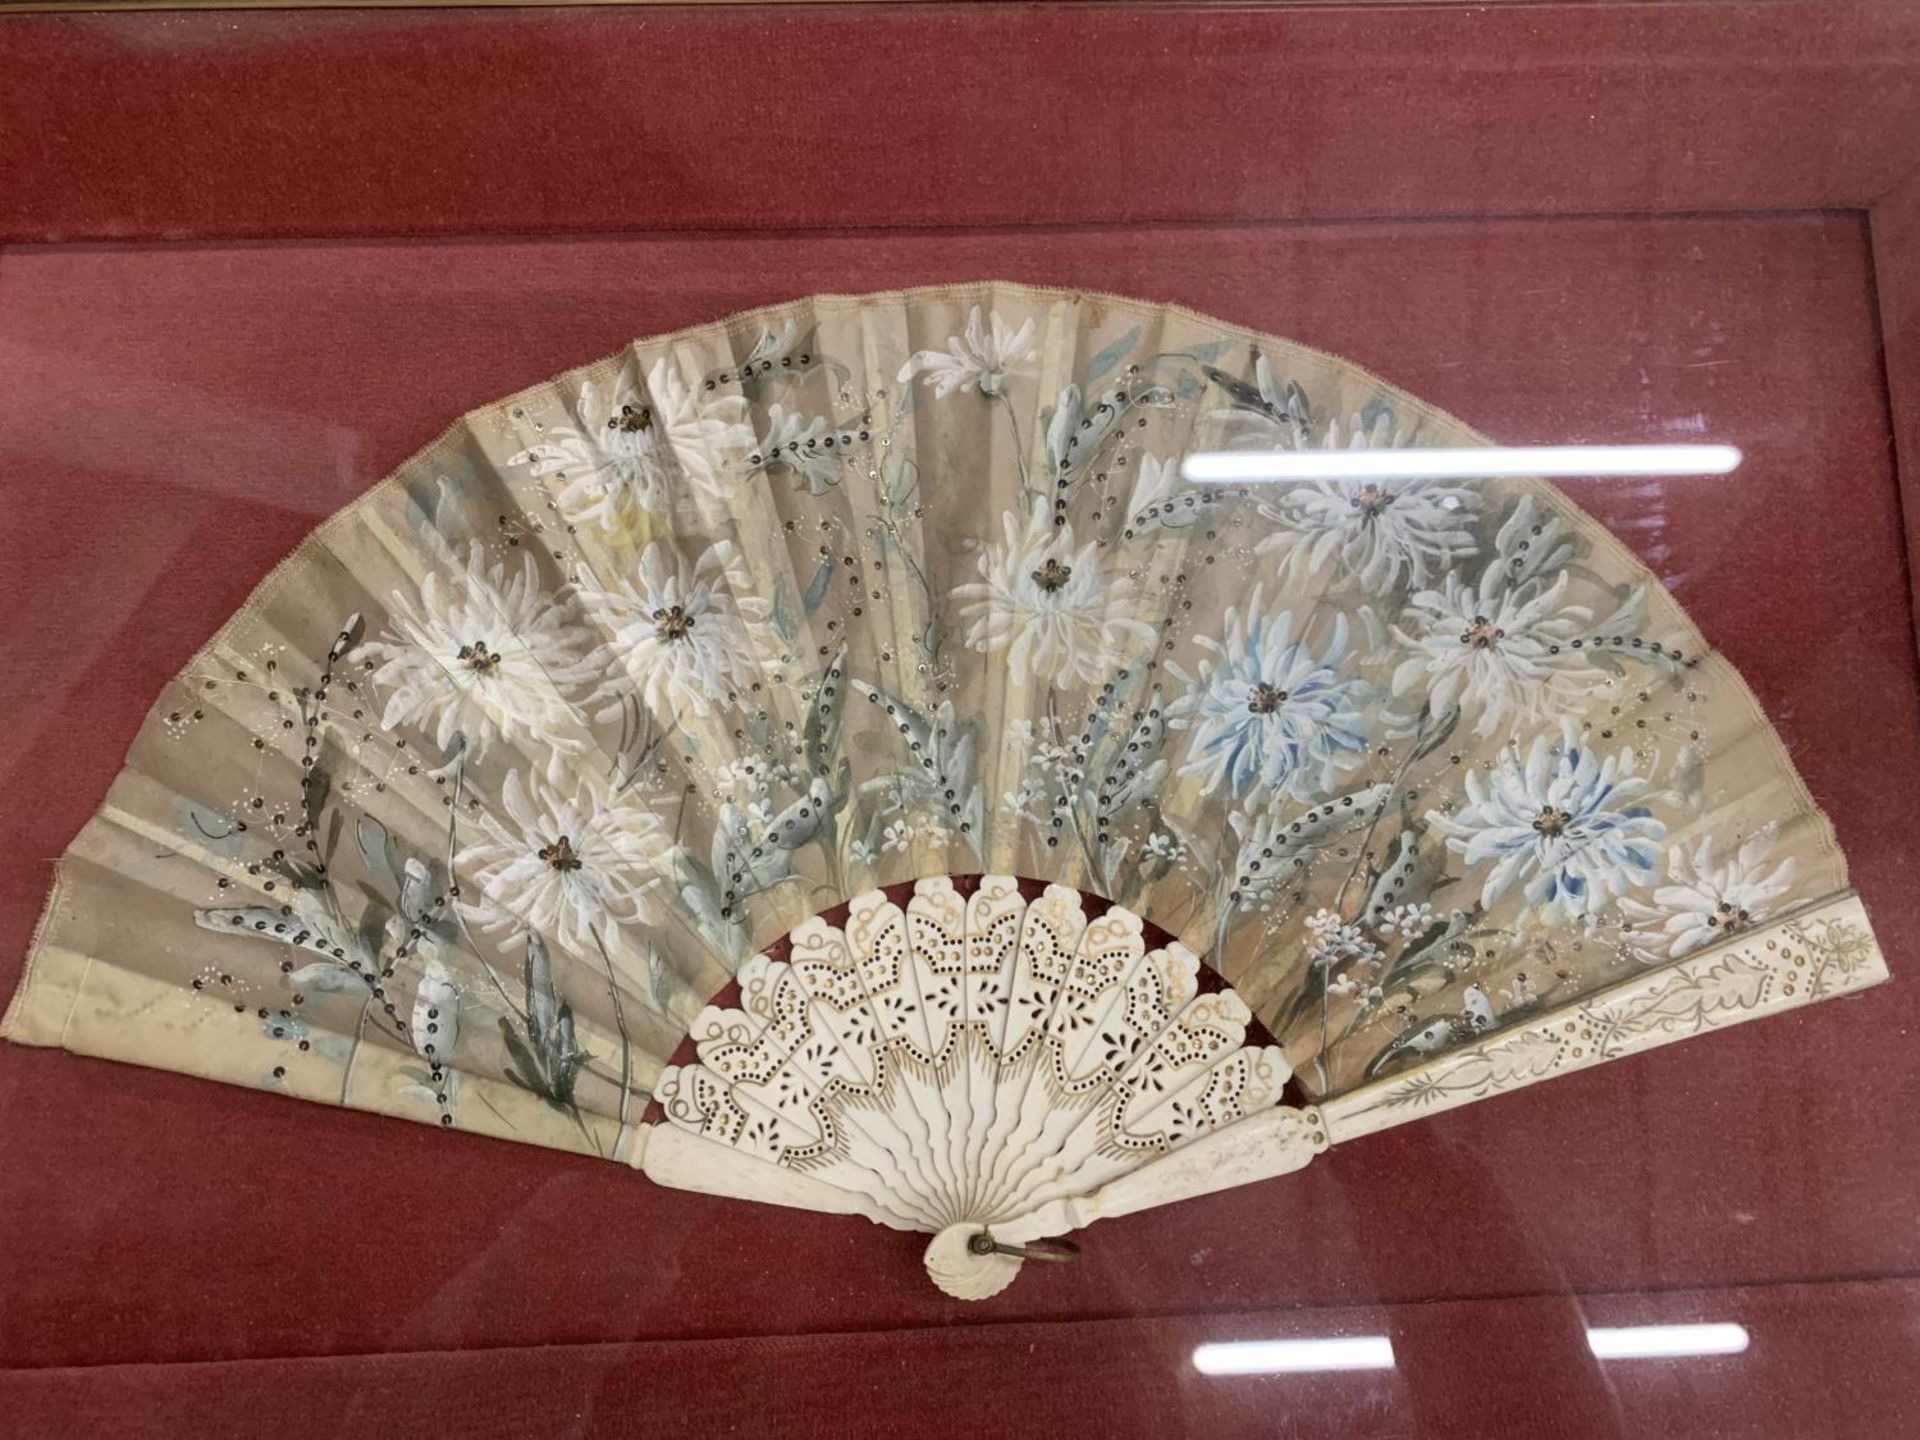 TWO VINTAGE FANS IN GLASS CASES, 60CM X 39CM AND 33CM X 30CM - Image 2 of 4